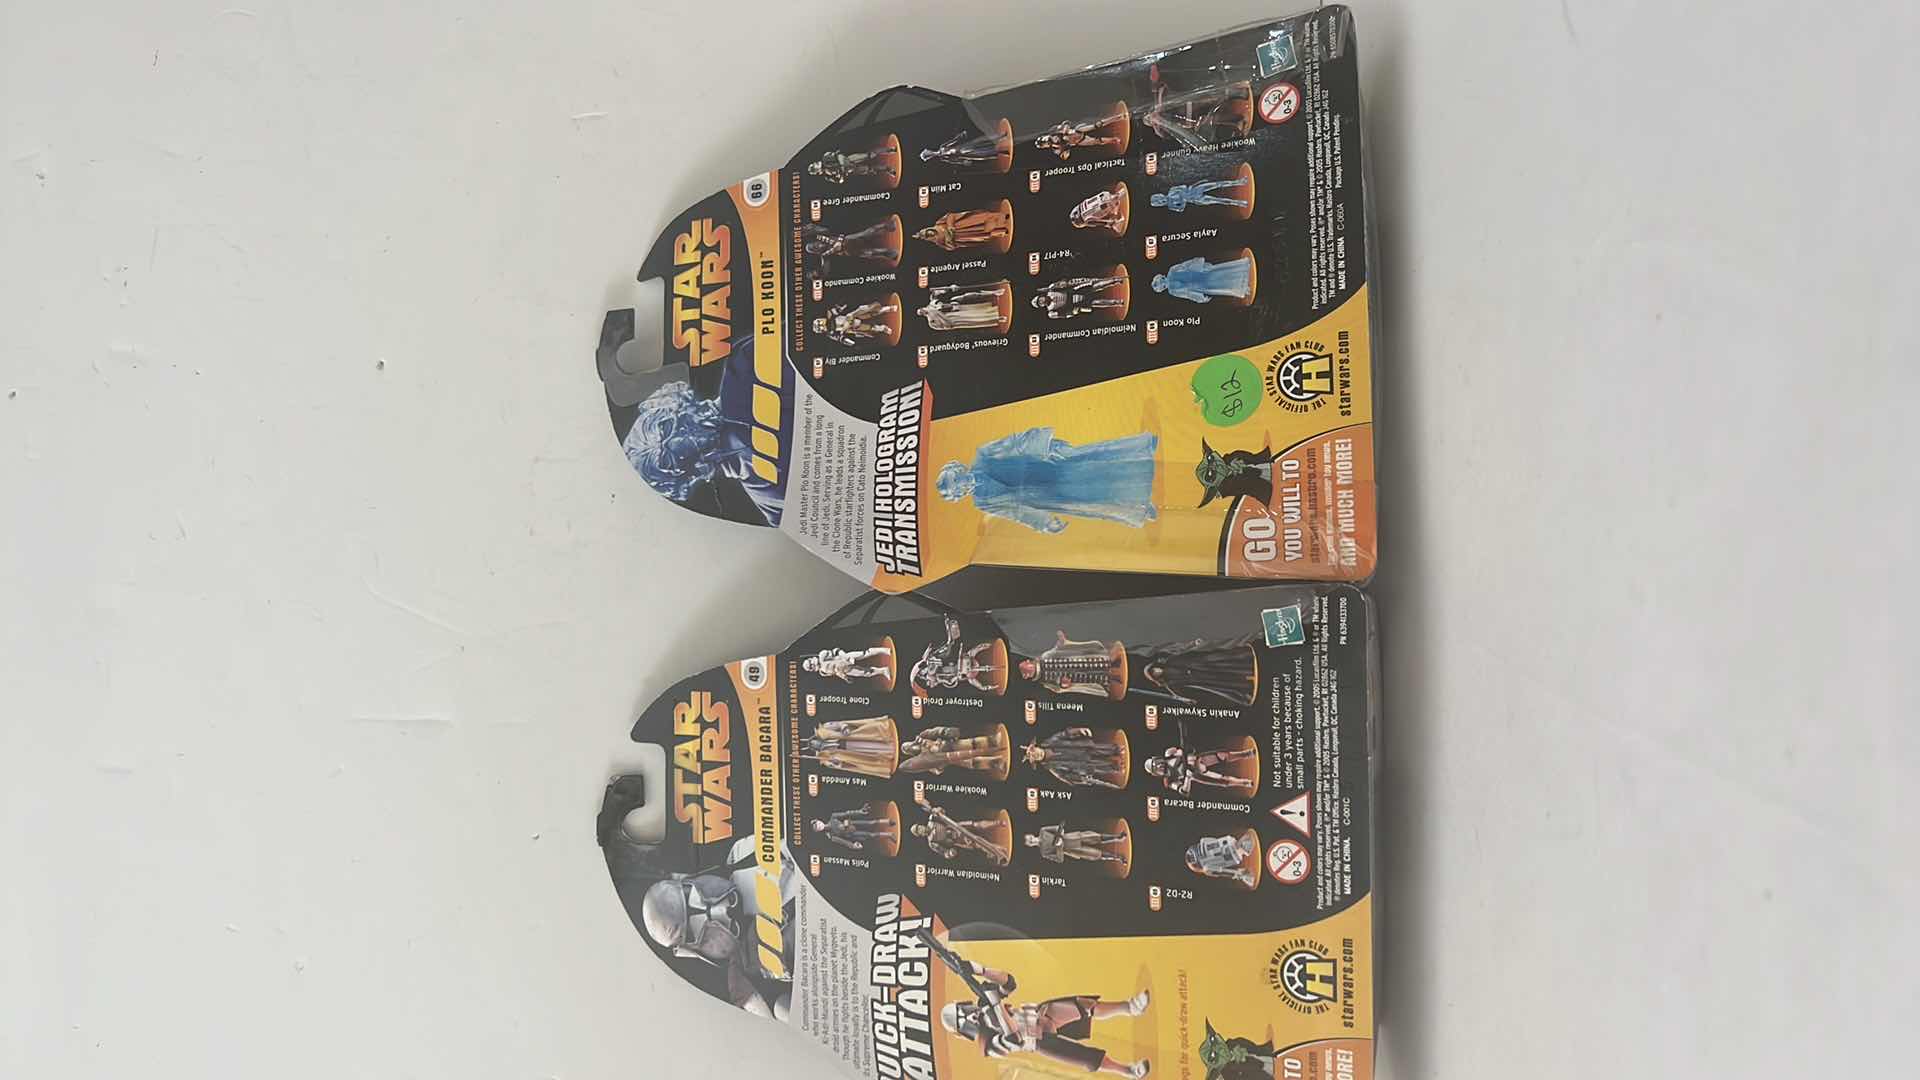 Photo 2 of 2-BRAND NEW STAR WARS REVENGE OF THE SITH ACTION FIGURES $25